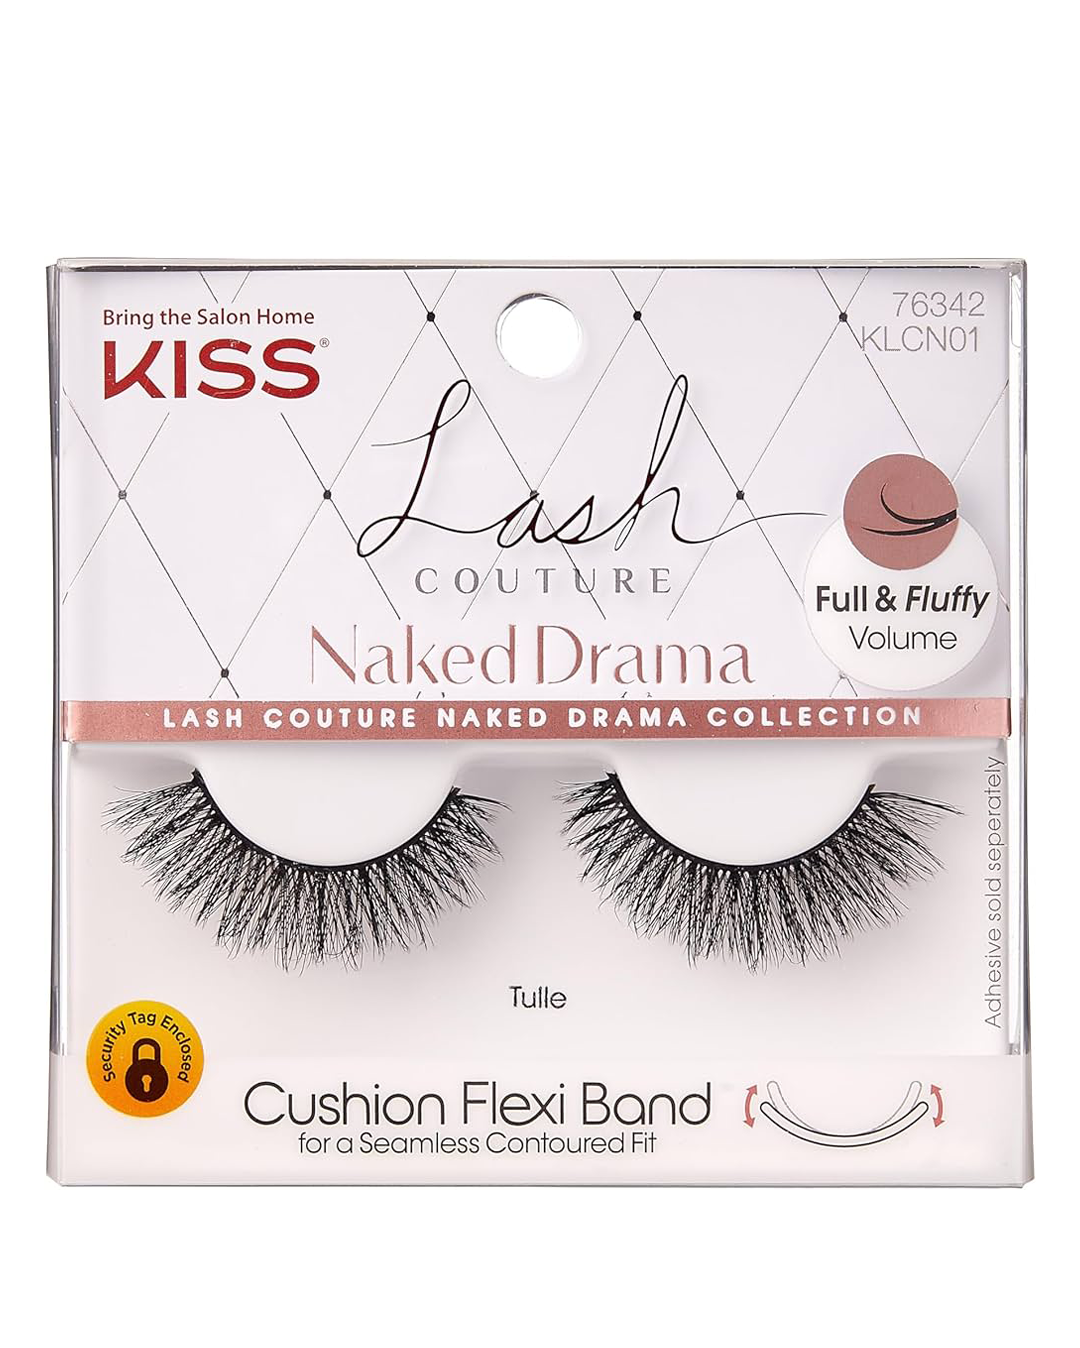 Kiss Lash Couture Naked Drama Collection - ( KLCN01)